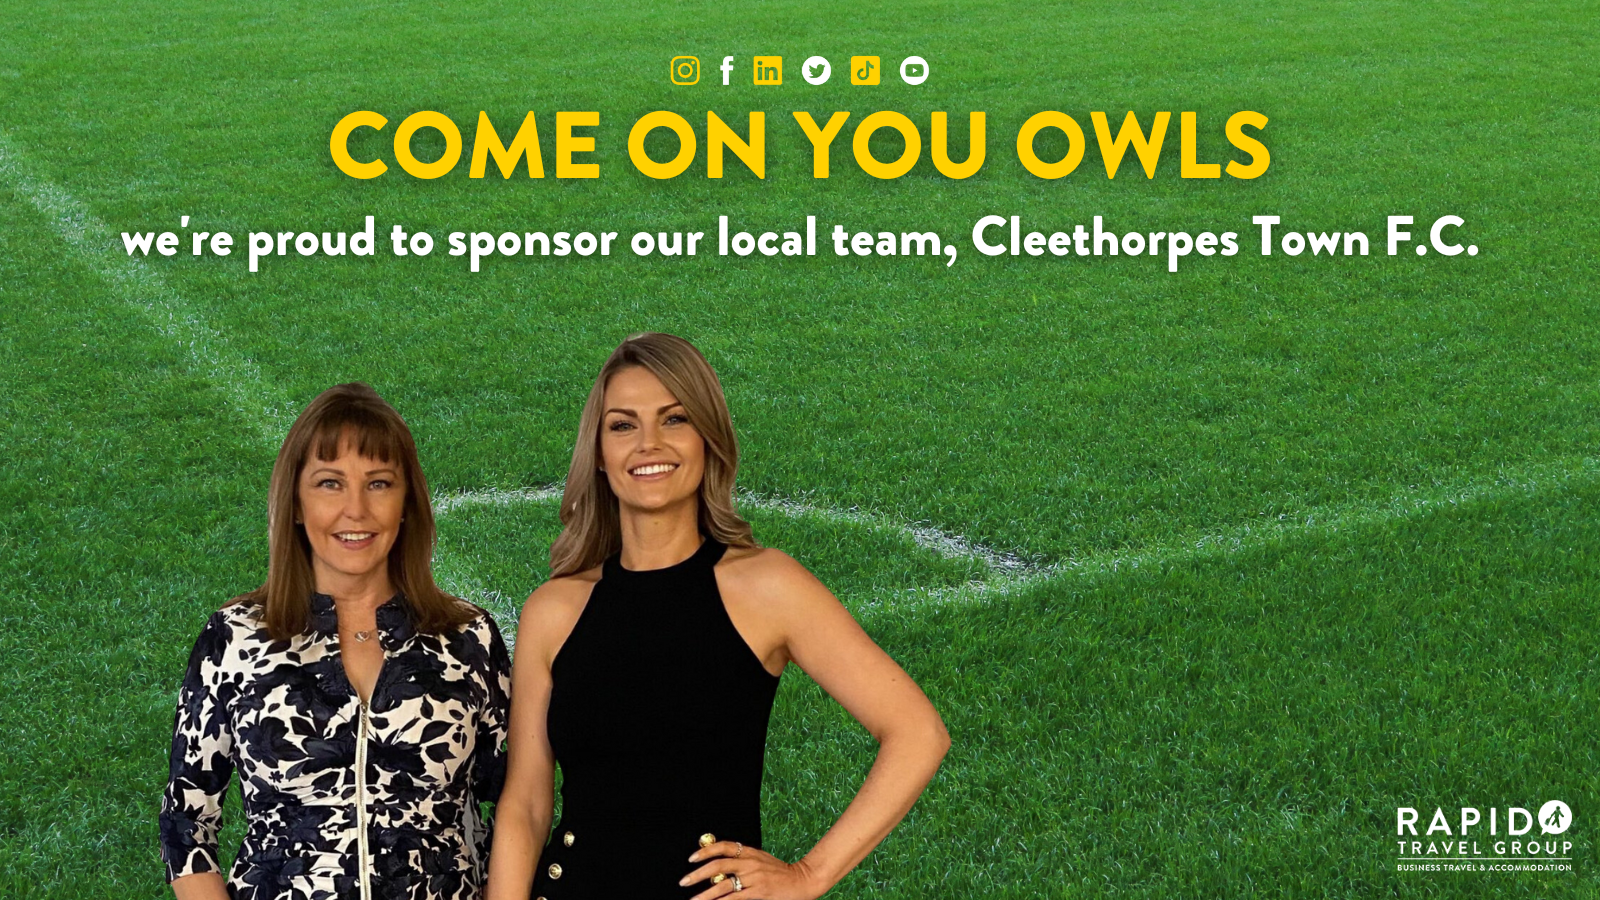 Come on you owls: we're proud to sponsor our local team, Cleethorpes Town F.C.